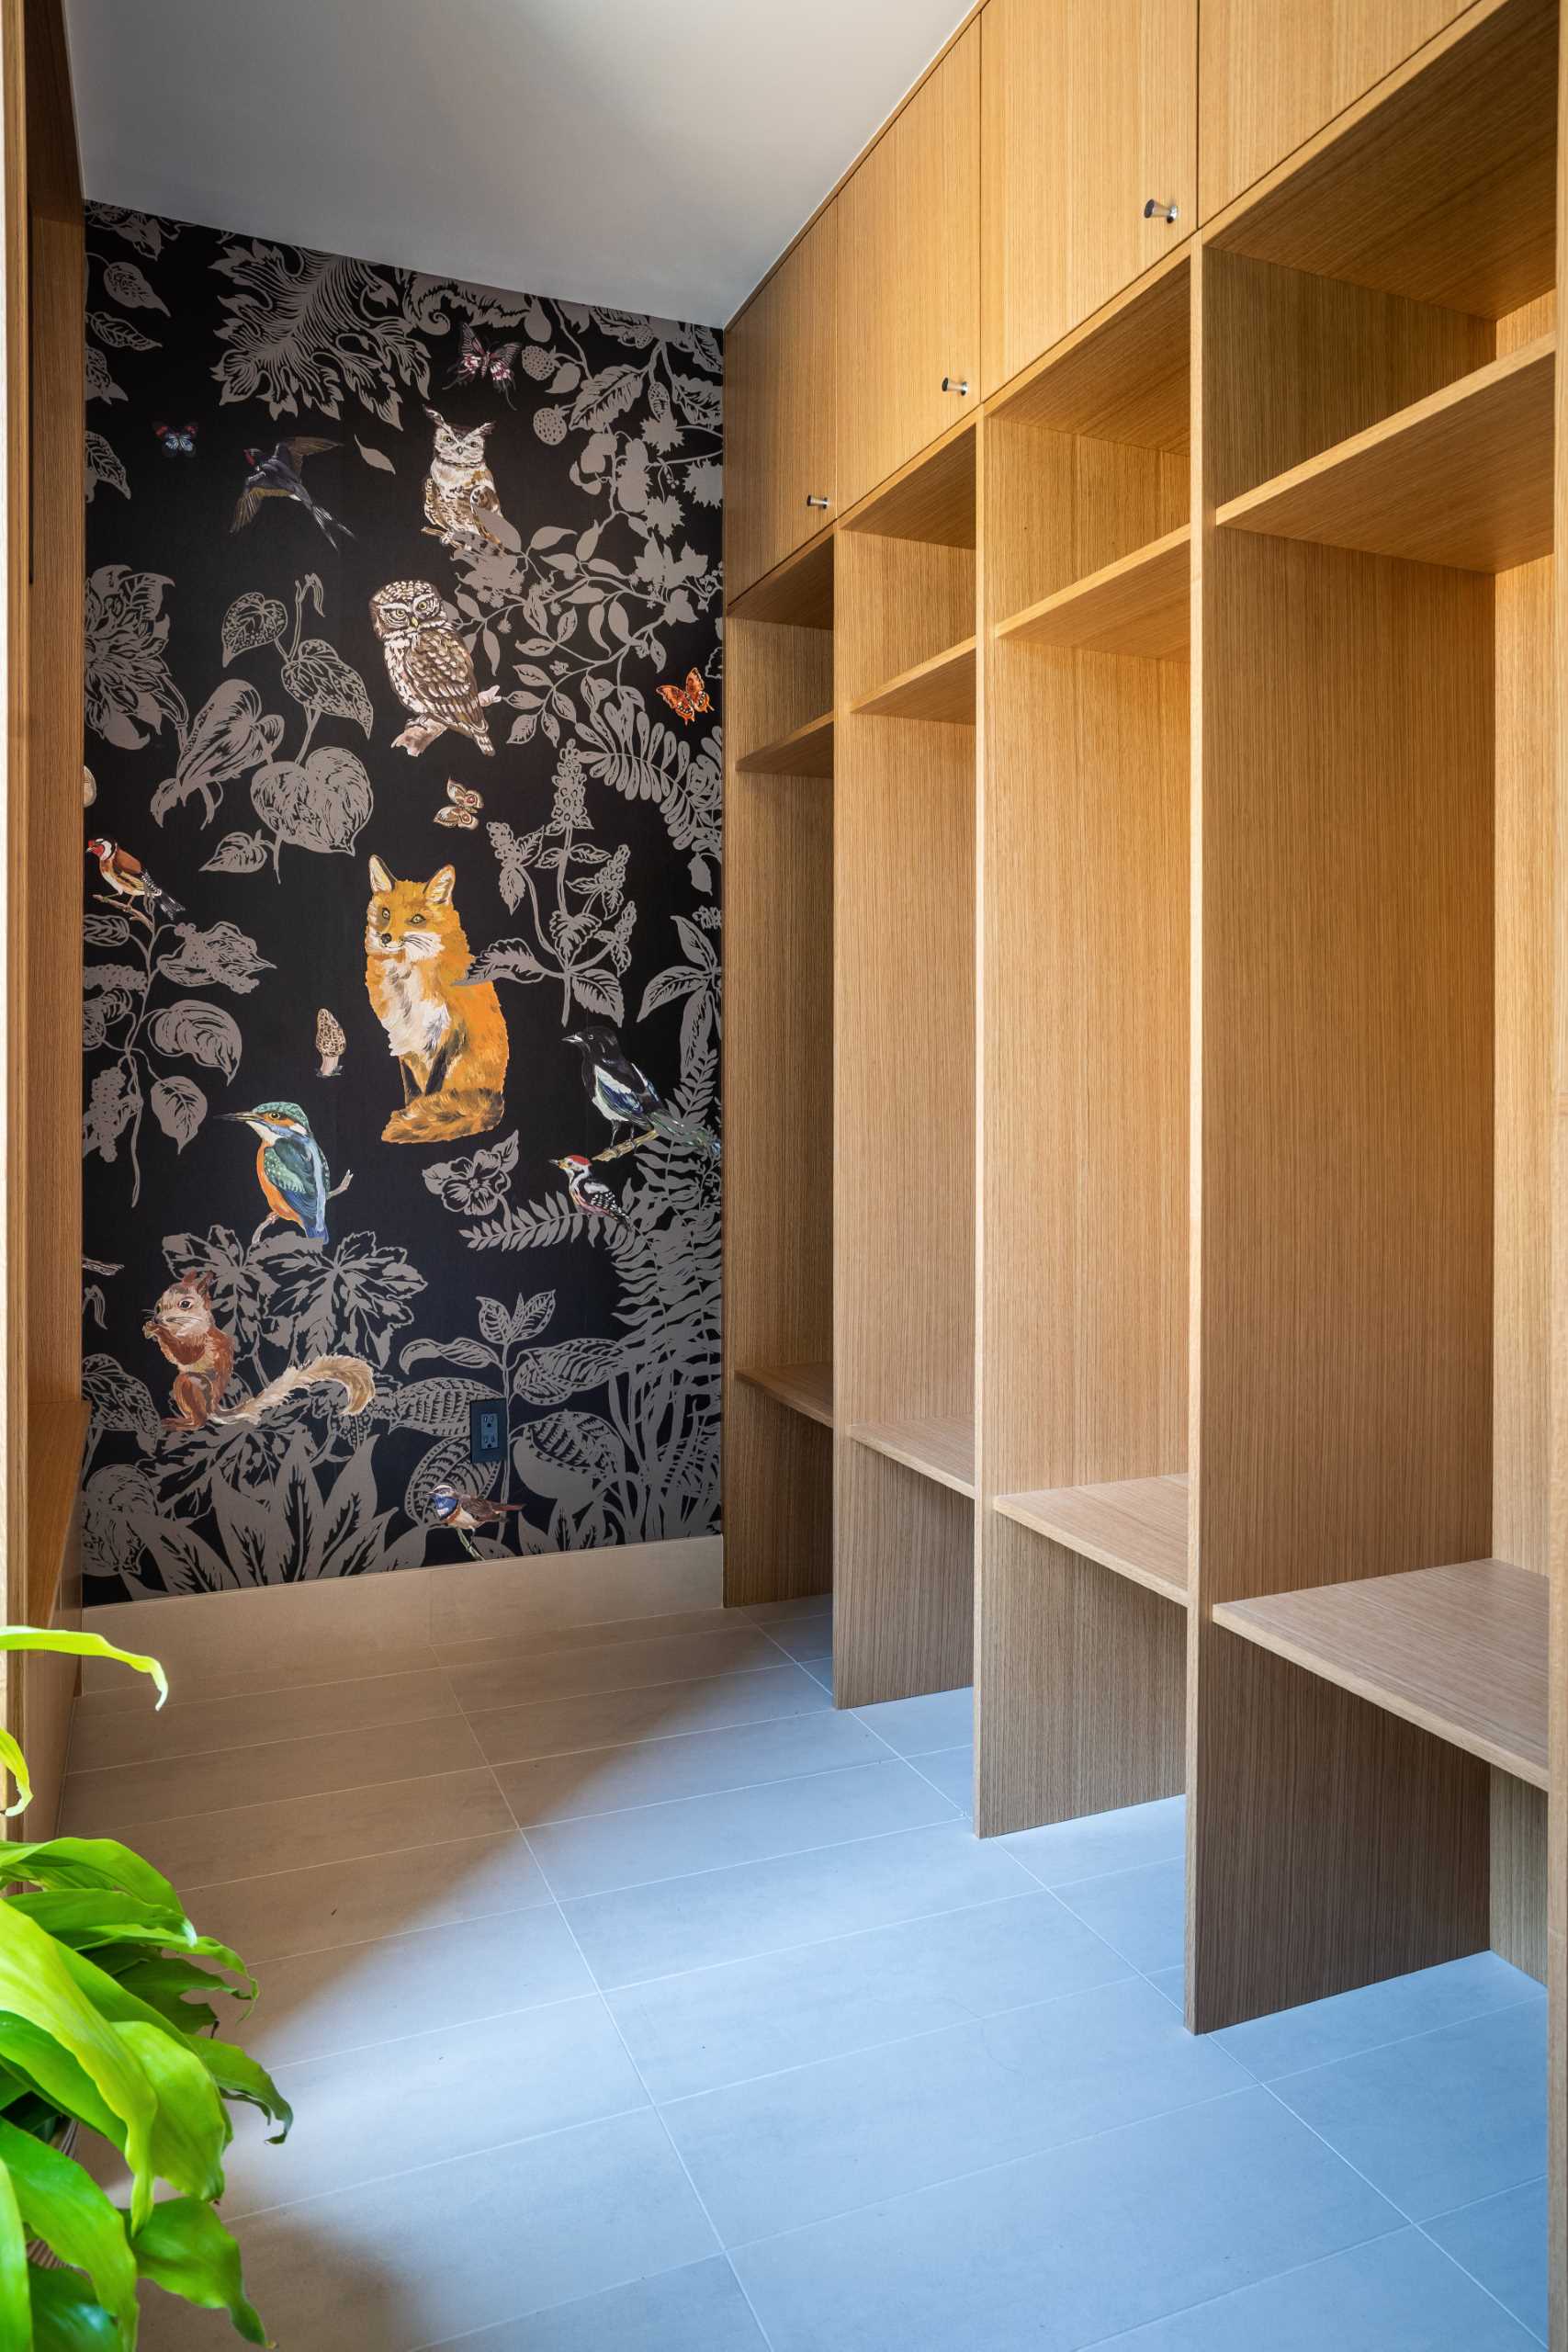 In this mudroom, custom floor-to-ceiling cabinets and shelving take up the wall, while a nature-inspired wallpaper adds an artistic element. Opposite the cabinetry is a pegboard wall that includes ،oks that can be moved when needed.